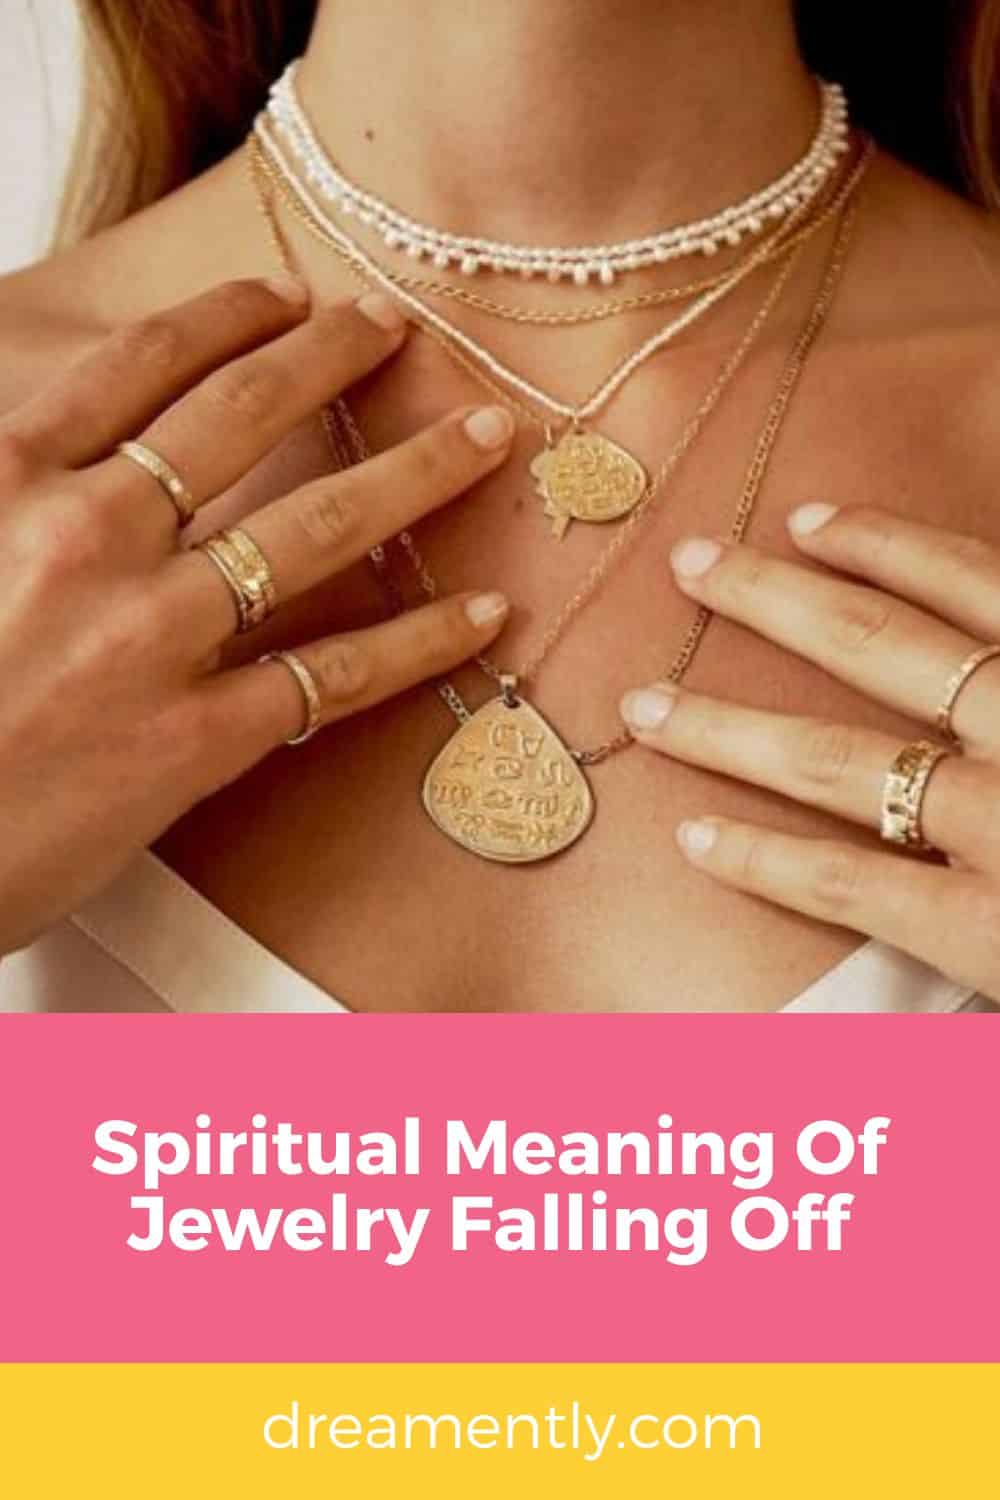 Spiritual Meaning Of Jewelry Falling Off